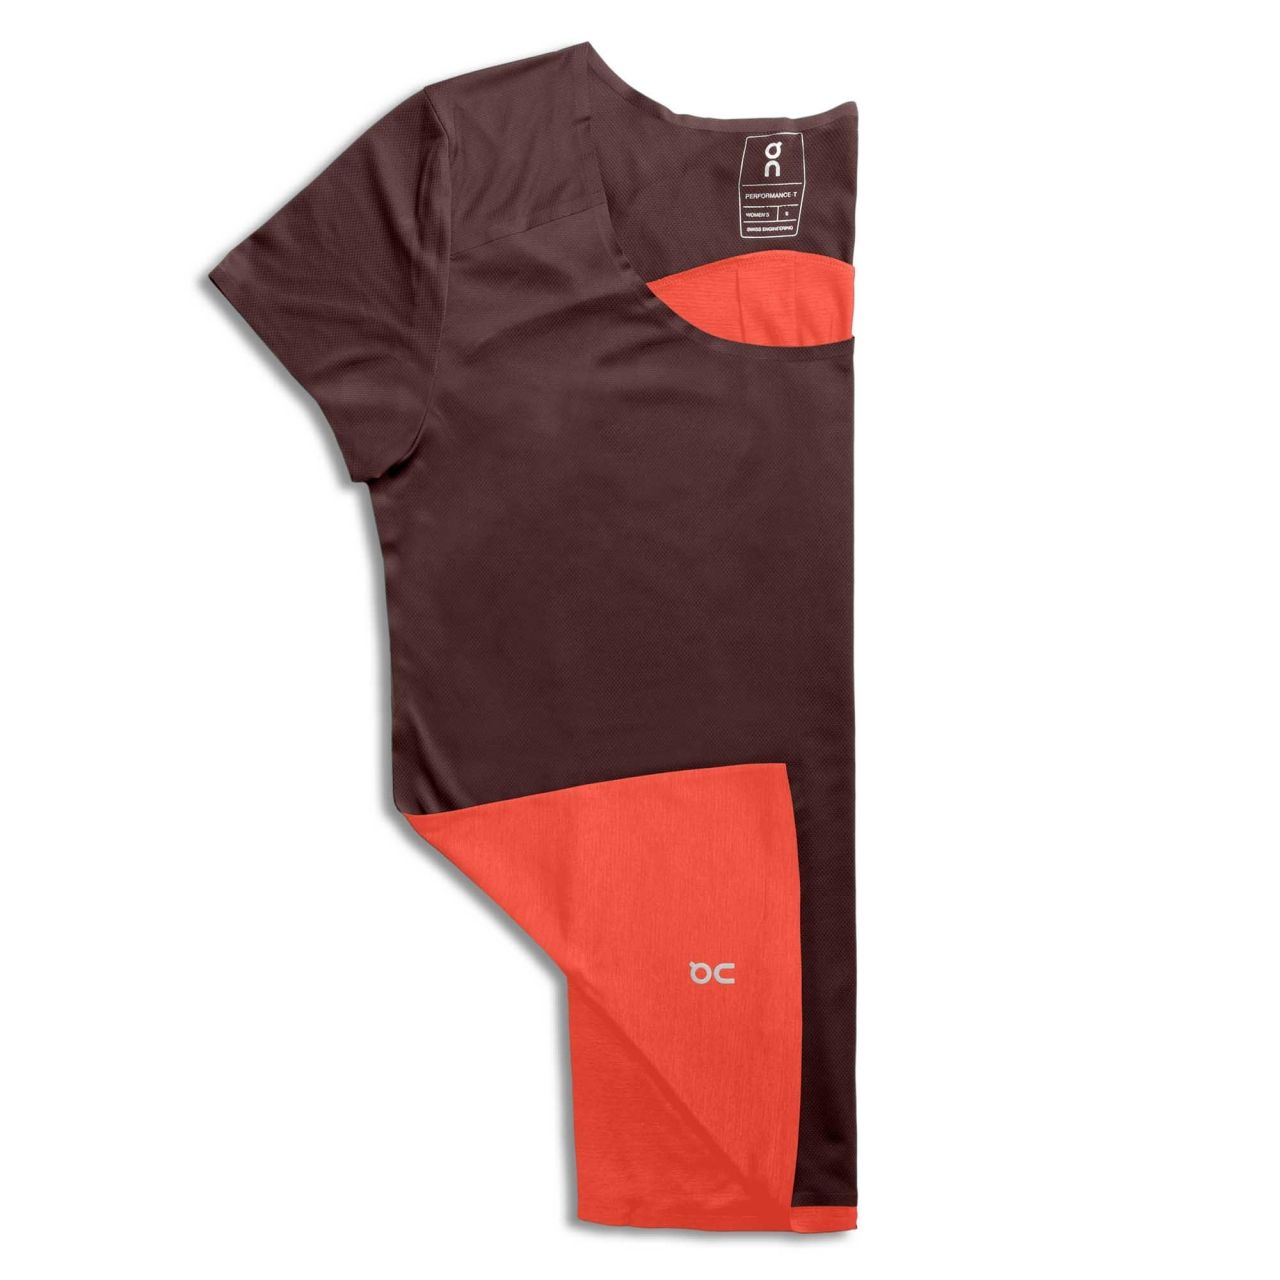 ON RUNNING PERFORMANCE T W MULBERRY SPICE Tee shirt running